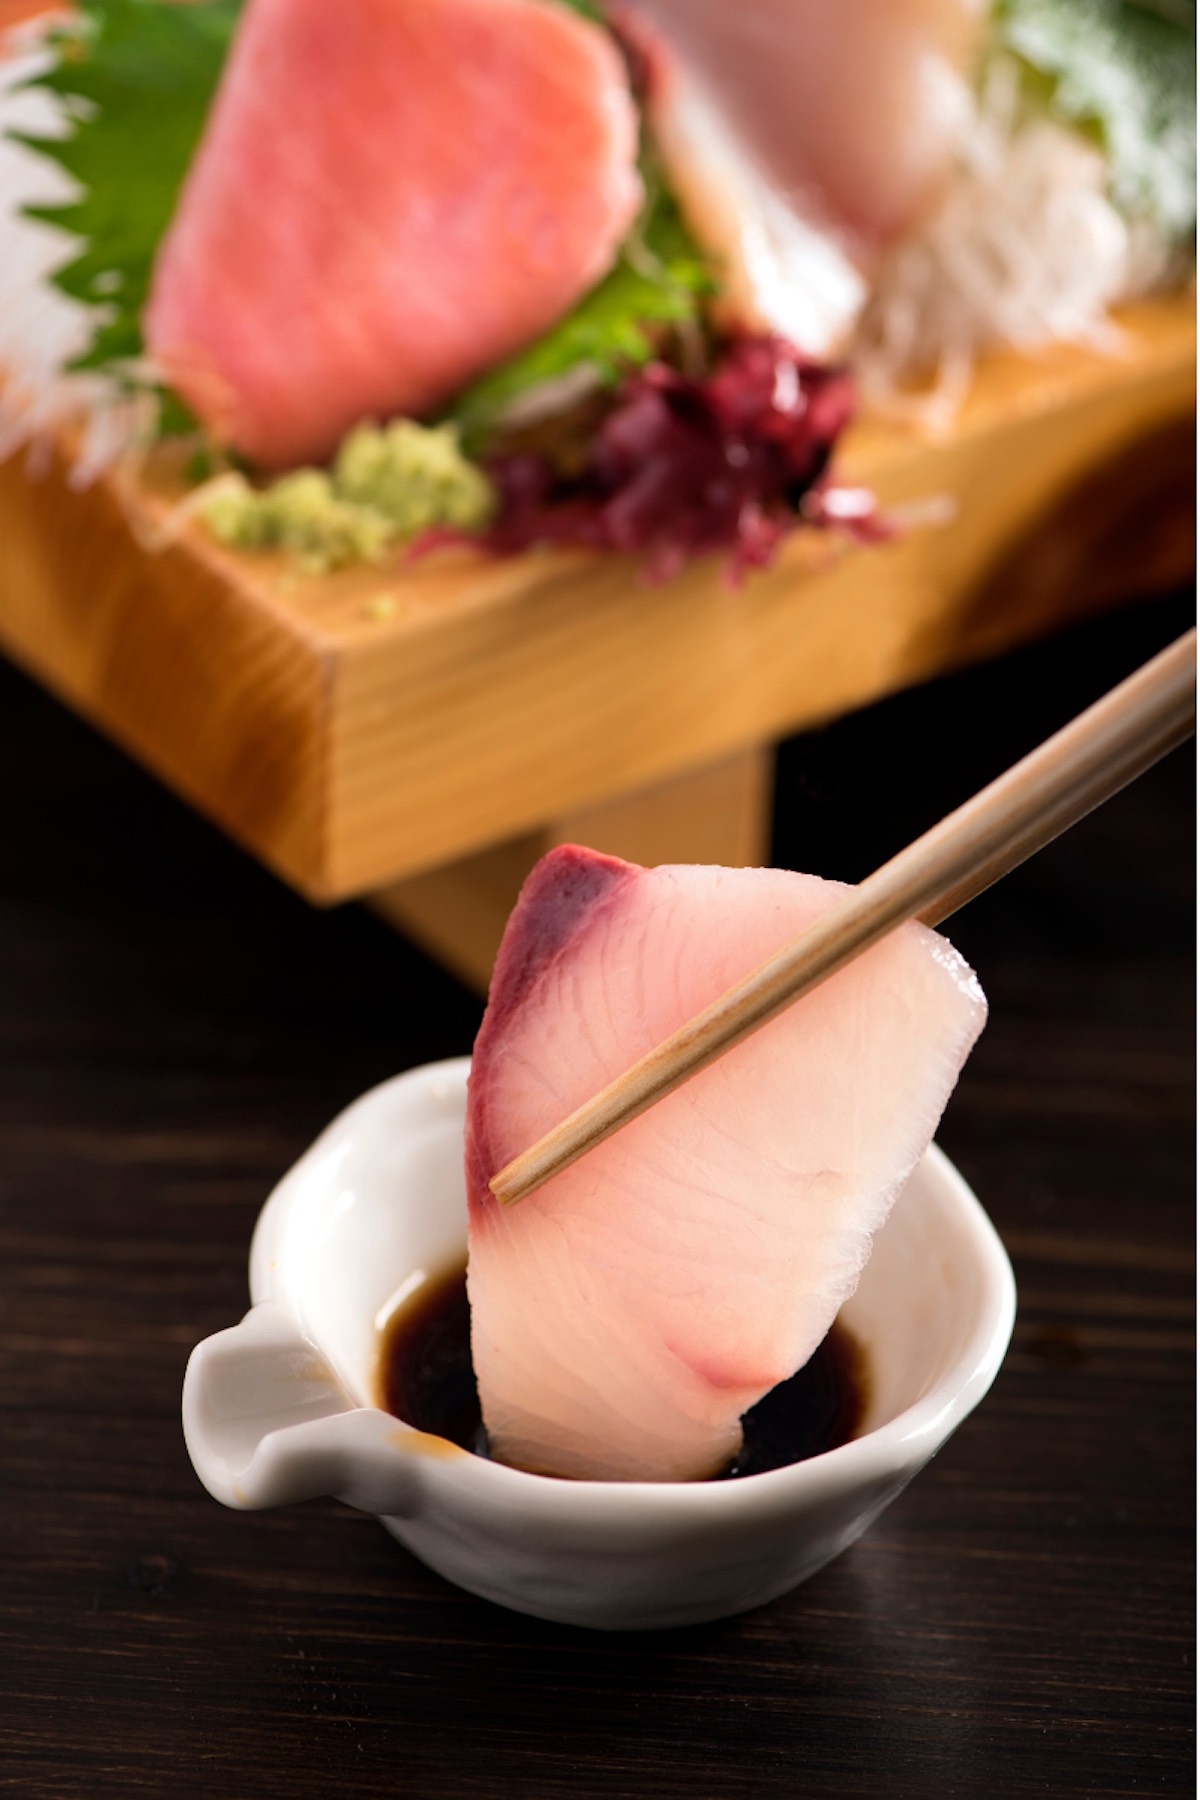 Yellowtail Sashimi made with delicious and buttery Hamachi fish! It’s so much cheaper than the Japanese restaurants, and incredibly easy to make at home. I’ll share with you how to cut yellowtail for sashimi, and make both the traditional and Nobu new style sashimi. #YellowtailSashimi #HamachiSashimi